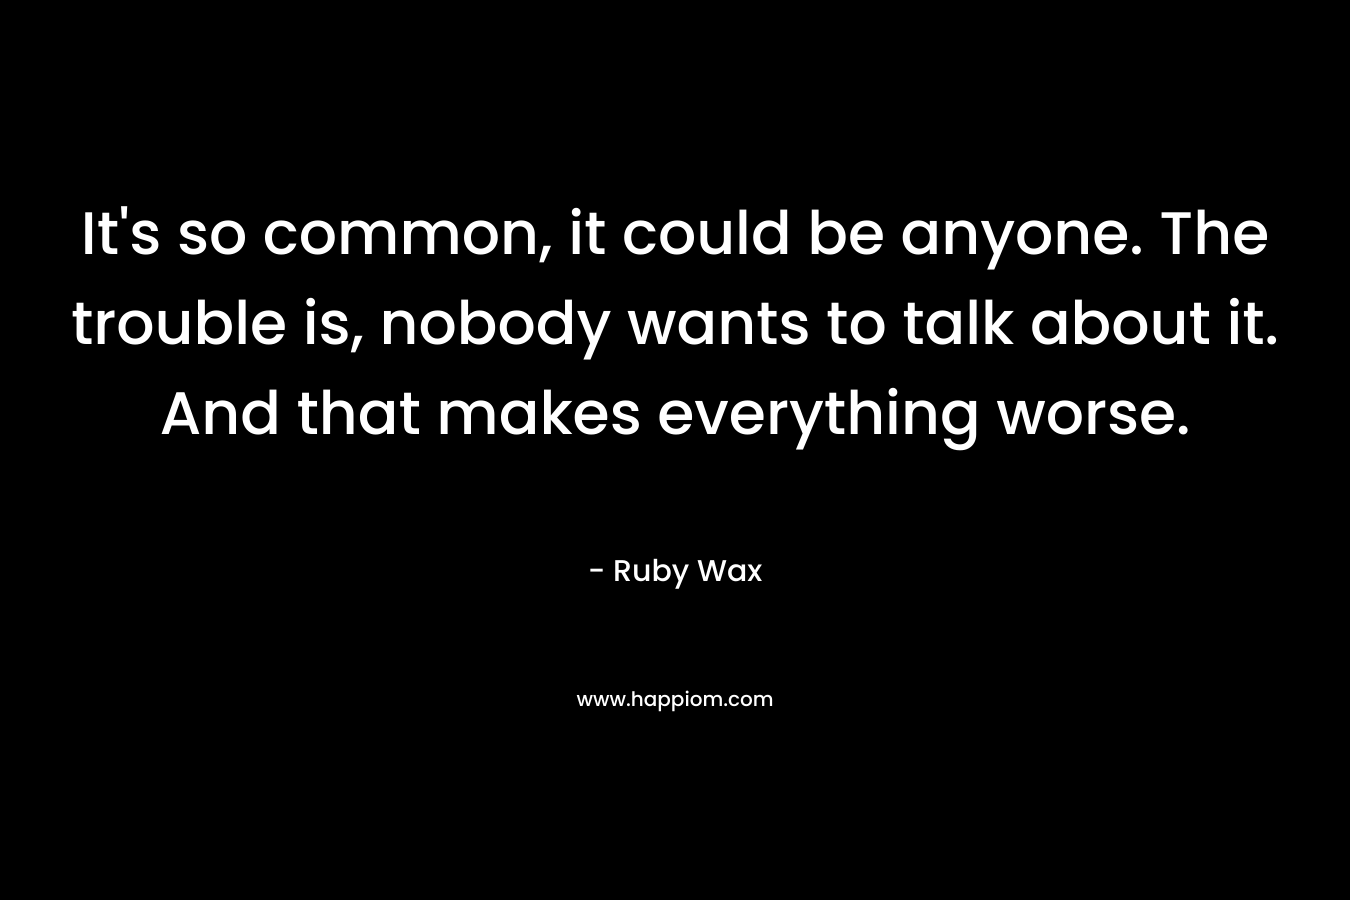 It’s so common, it could be anyone. The trouble is, nobody wants to talk about it. And that makes everything worse. – Ruby Wax